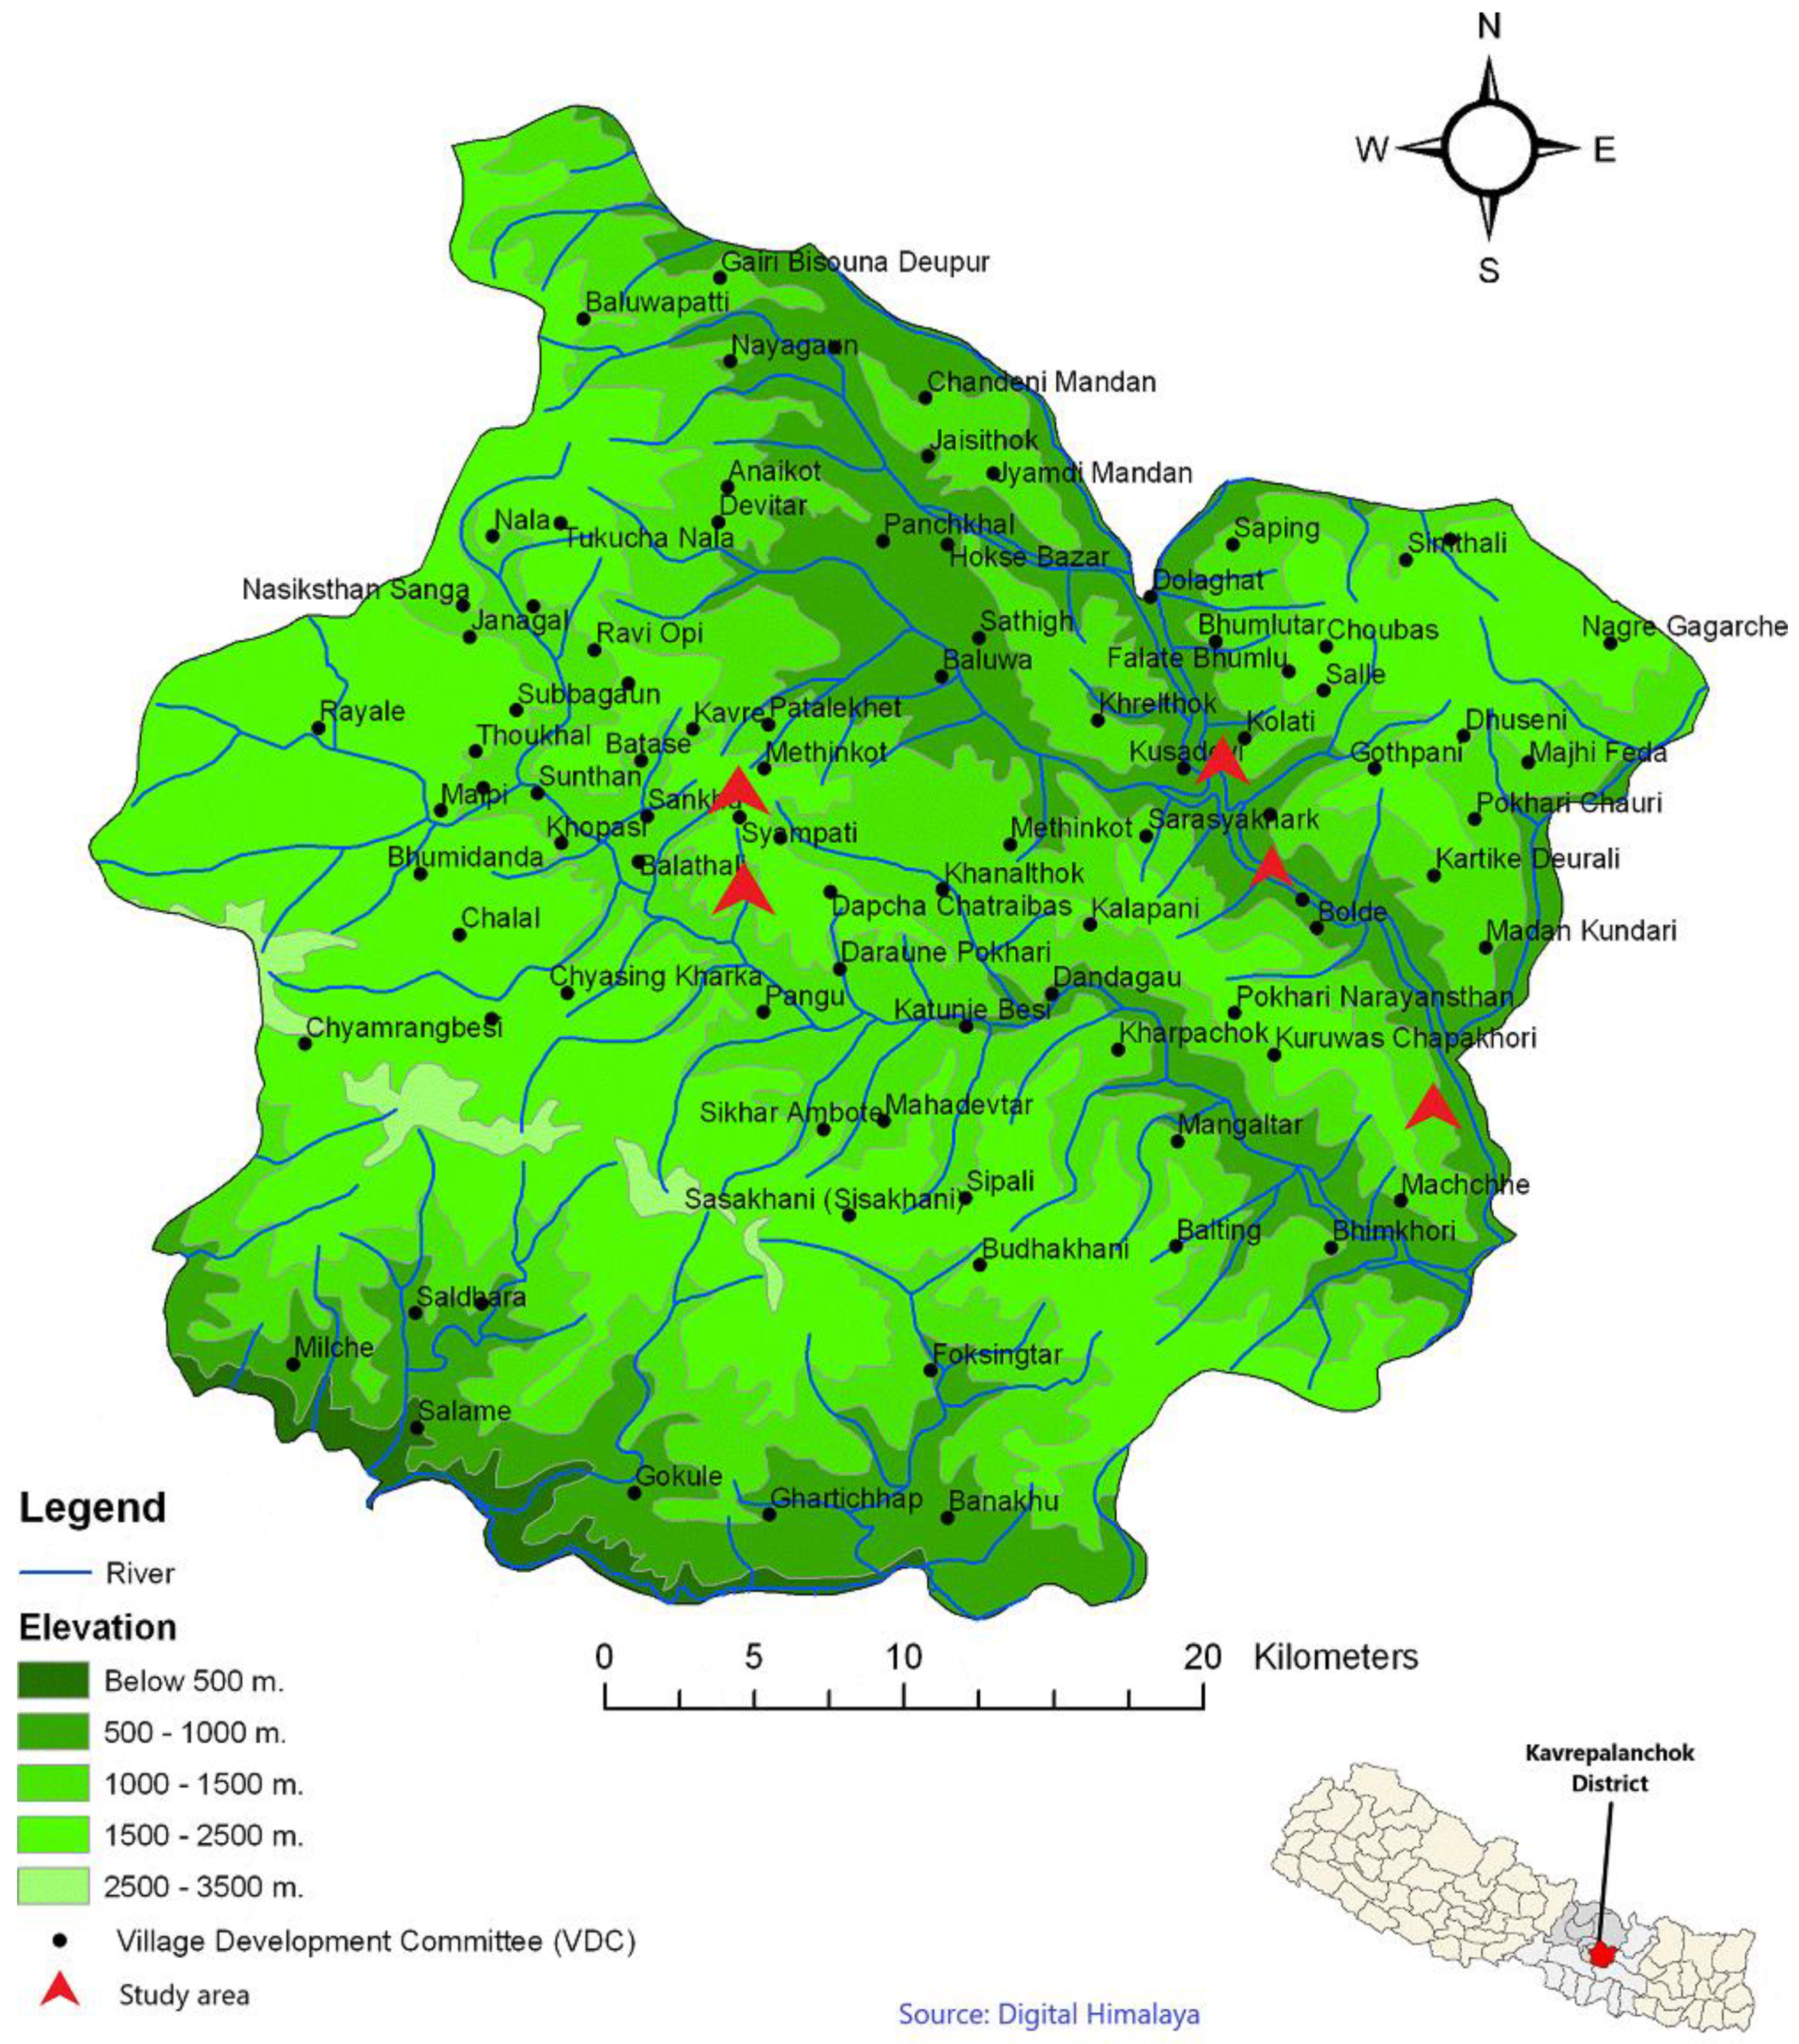 Plants Free Full-Text Traditional Uses of Medicinal Plants by Ethnic People in the Kavrepalanchok District, Central Nepal